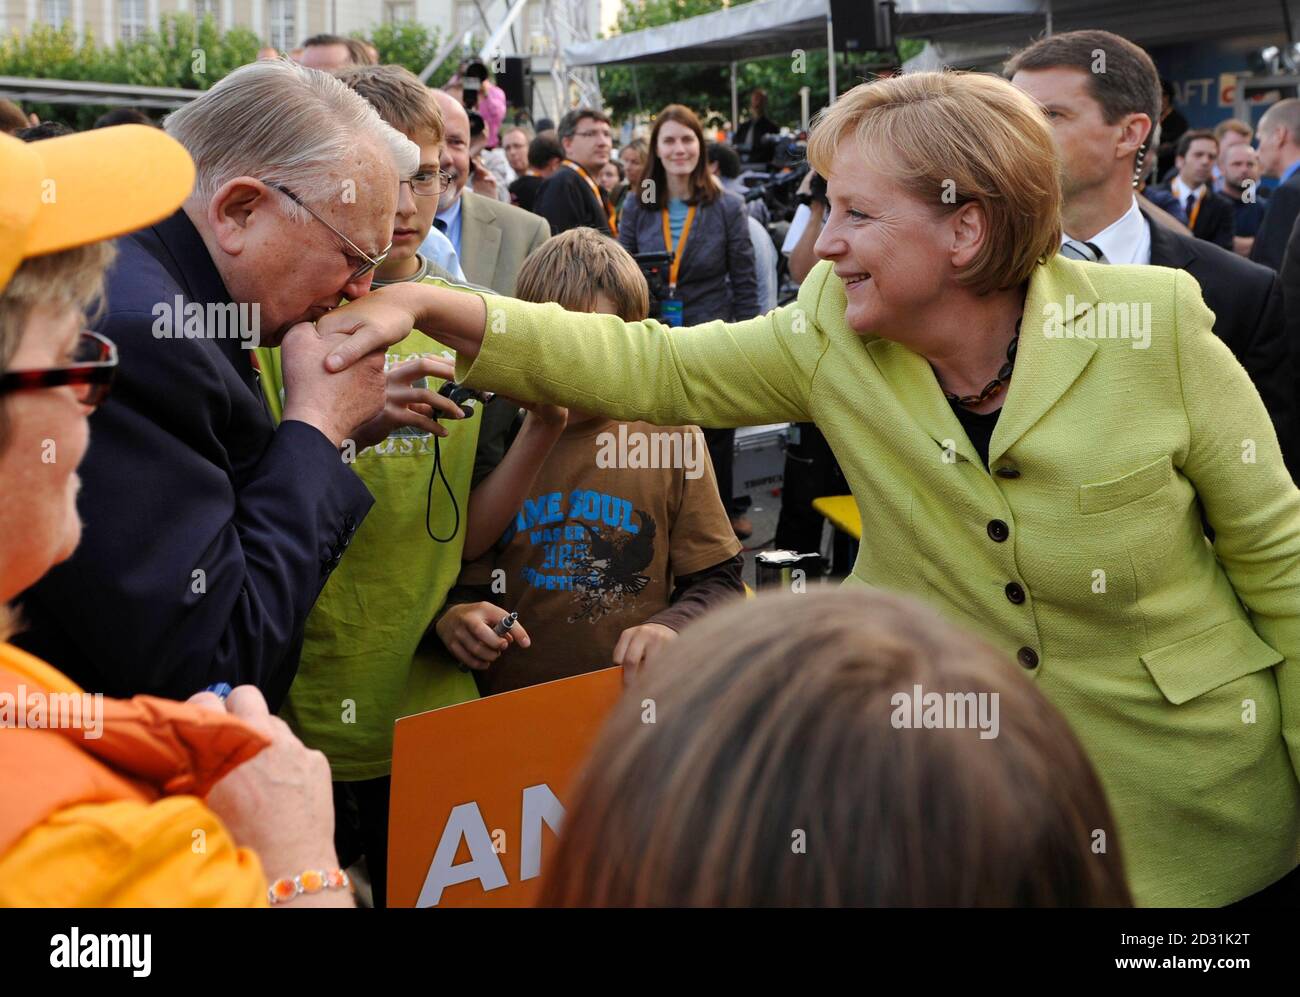 German Chancellor Angela Merkel receives a hand kiss from a supporter  following an election campaign rally in Kassel September 21, 2009. Merkel,  the leader of the conservative Christian Democratic Union (CDU) party,